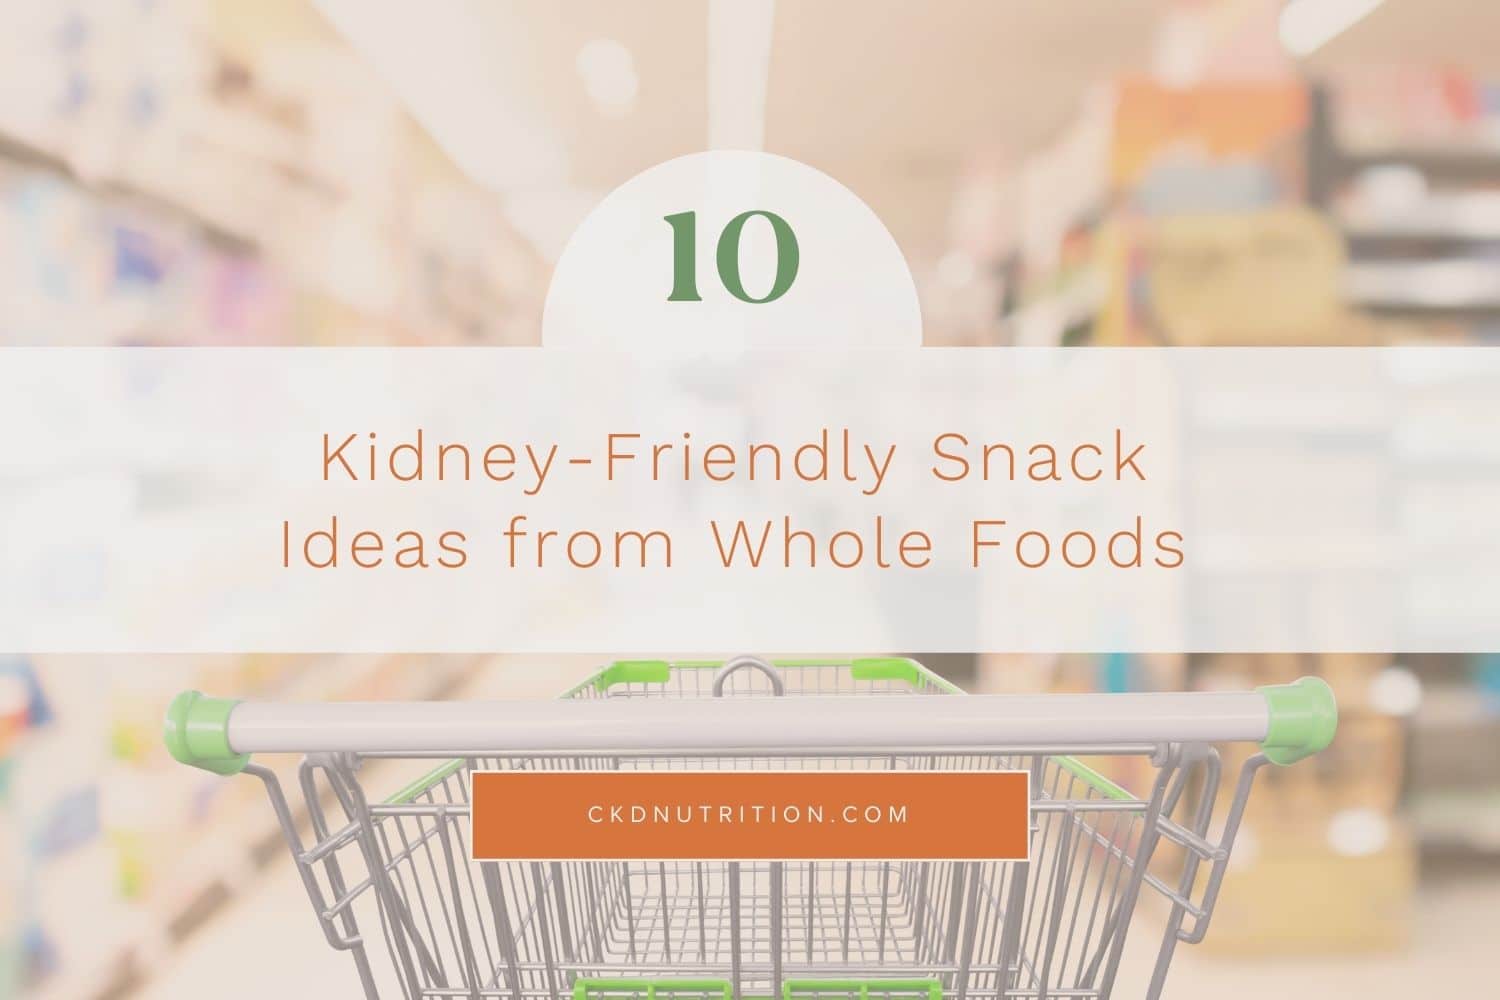 Kidney Friendly Snack Ideas from Whole Foods